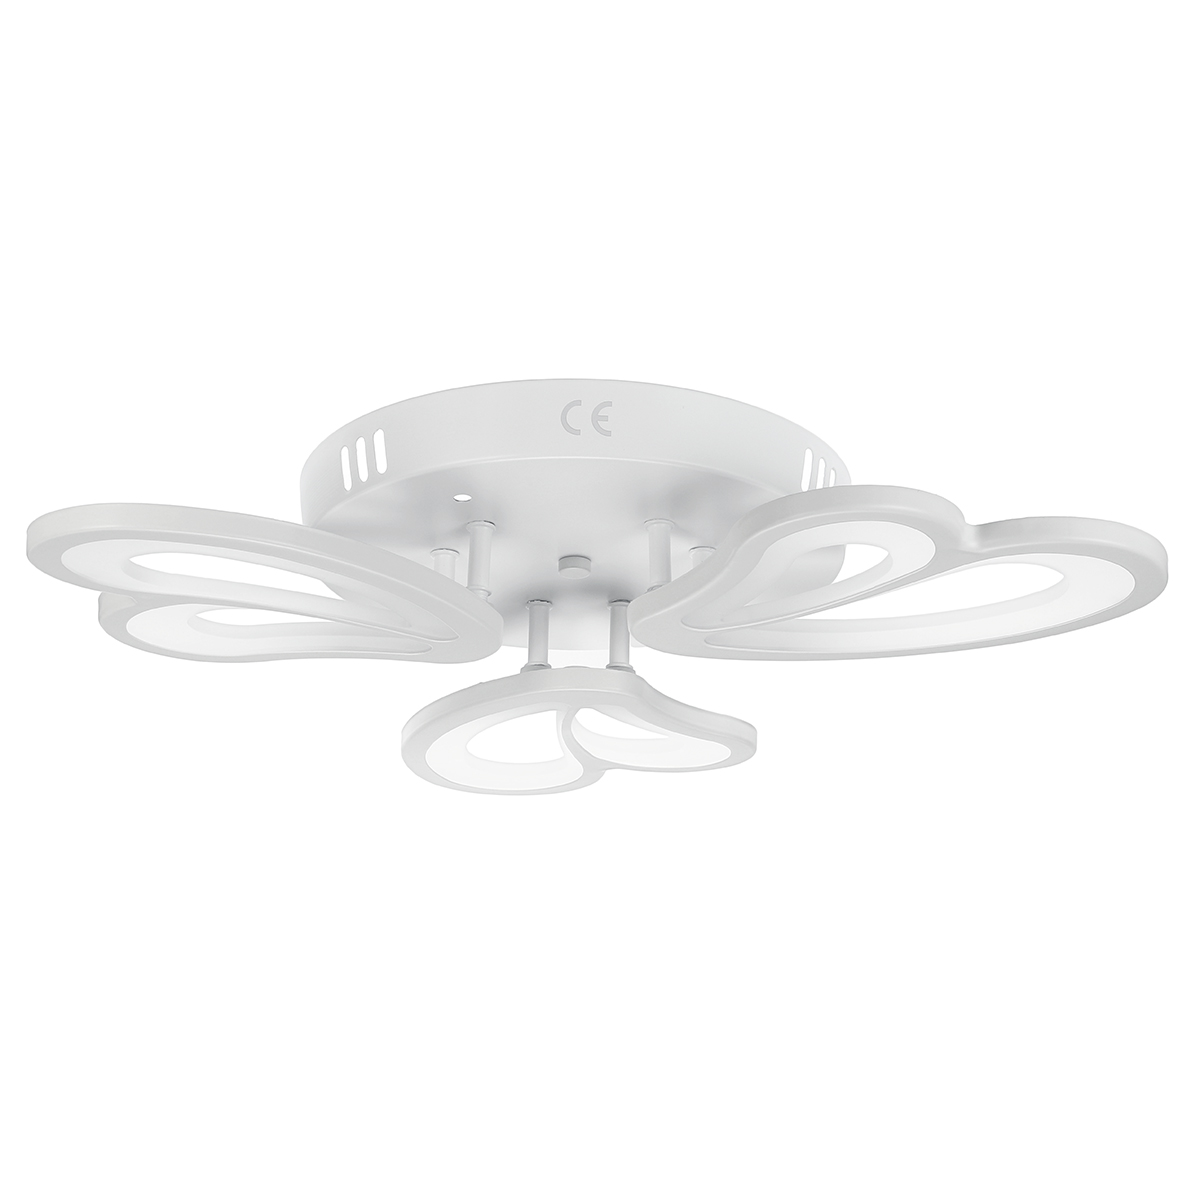 Find 3 Heads Modern Ceiling Lamp Remote Control Living Room Bedroom Study Light AC110 220V for Sale on Gipsybee.com with cryptocurrencies